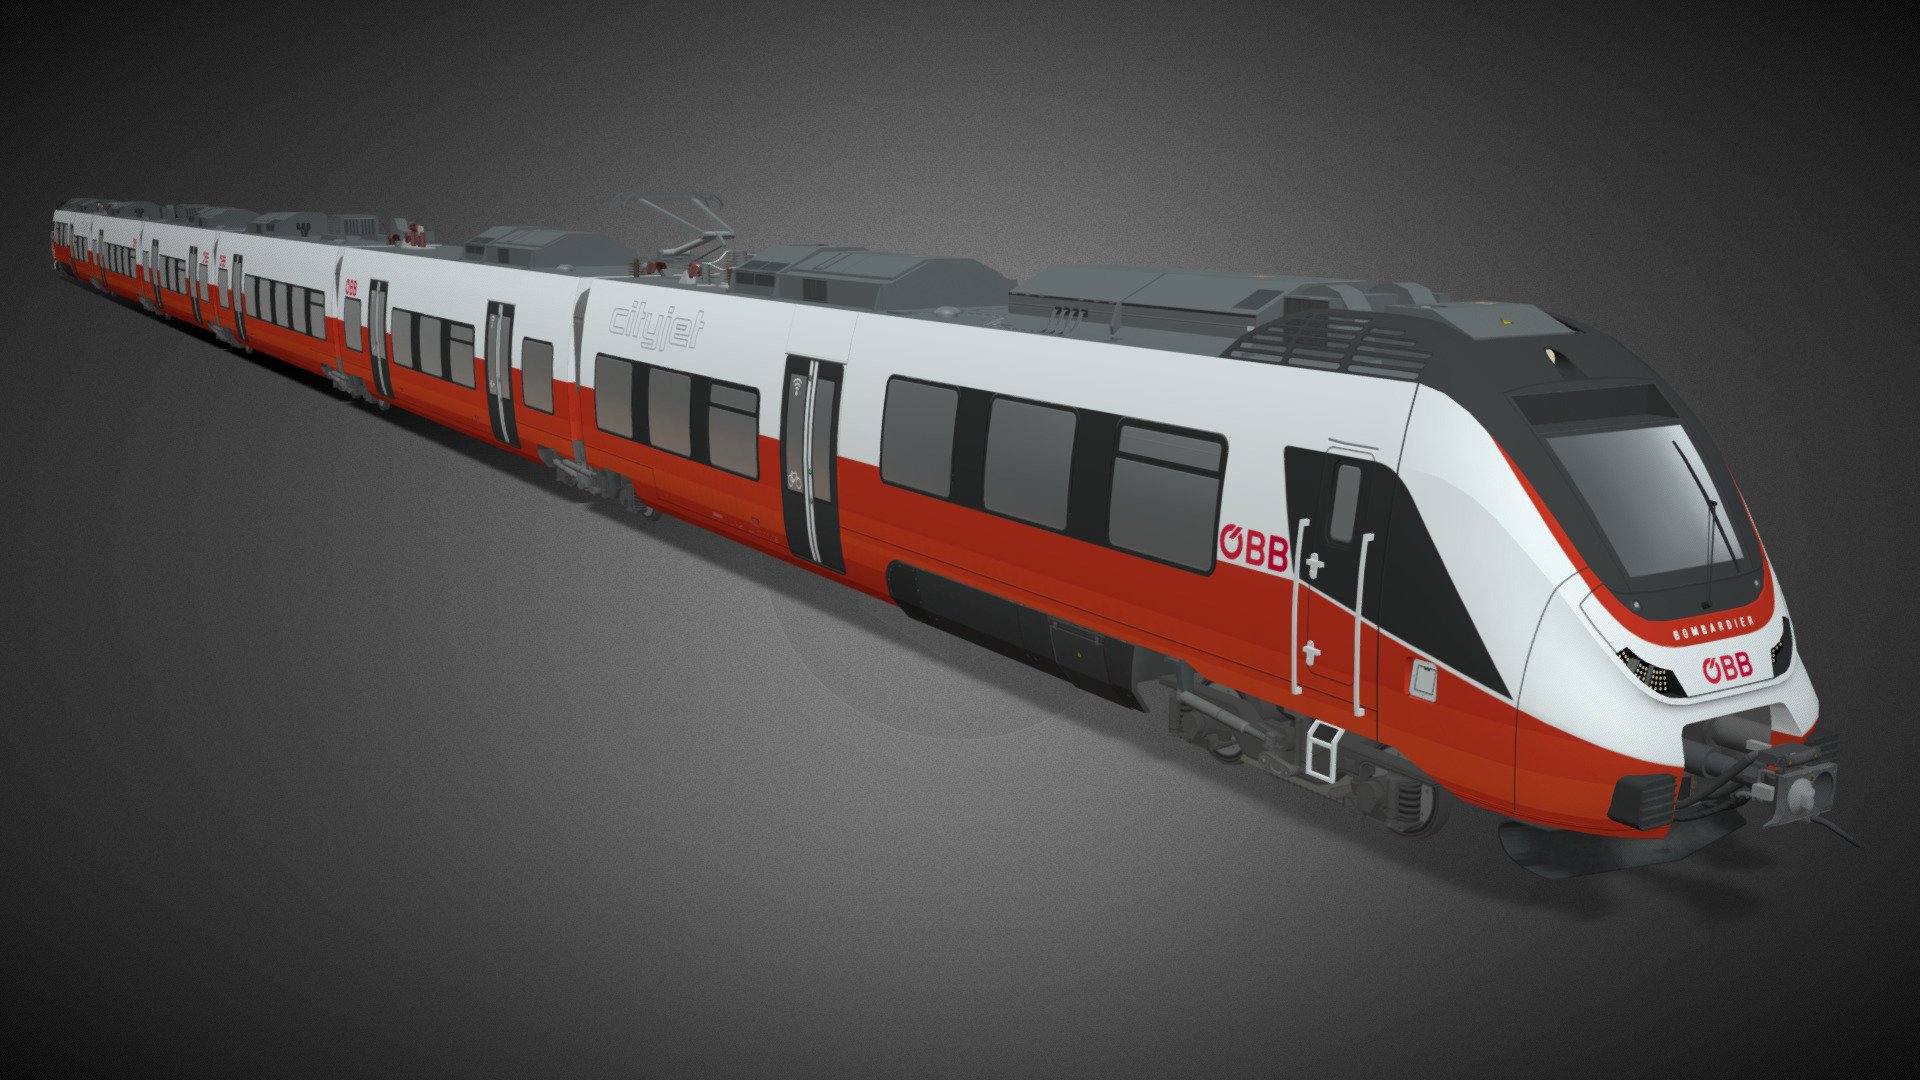 Bombardier Talent 3 in ÖBB livery. This model was originally made as an asset for the game Cities: Skylines. There are simplifications to the texture and model to keep it optimised for the game 3d model